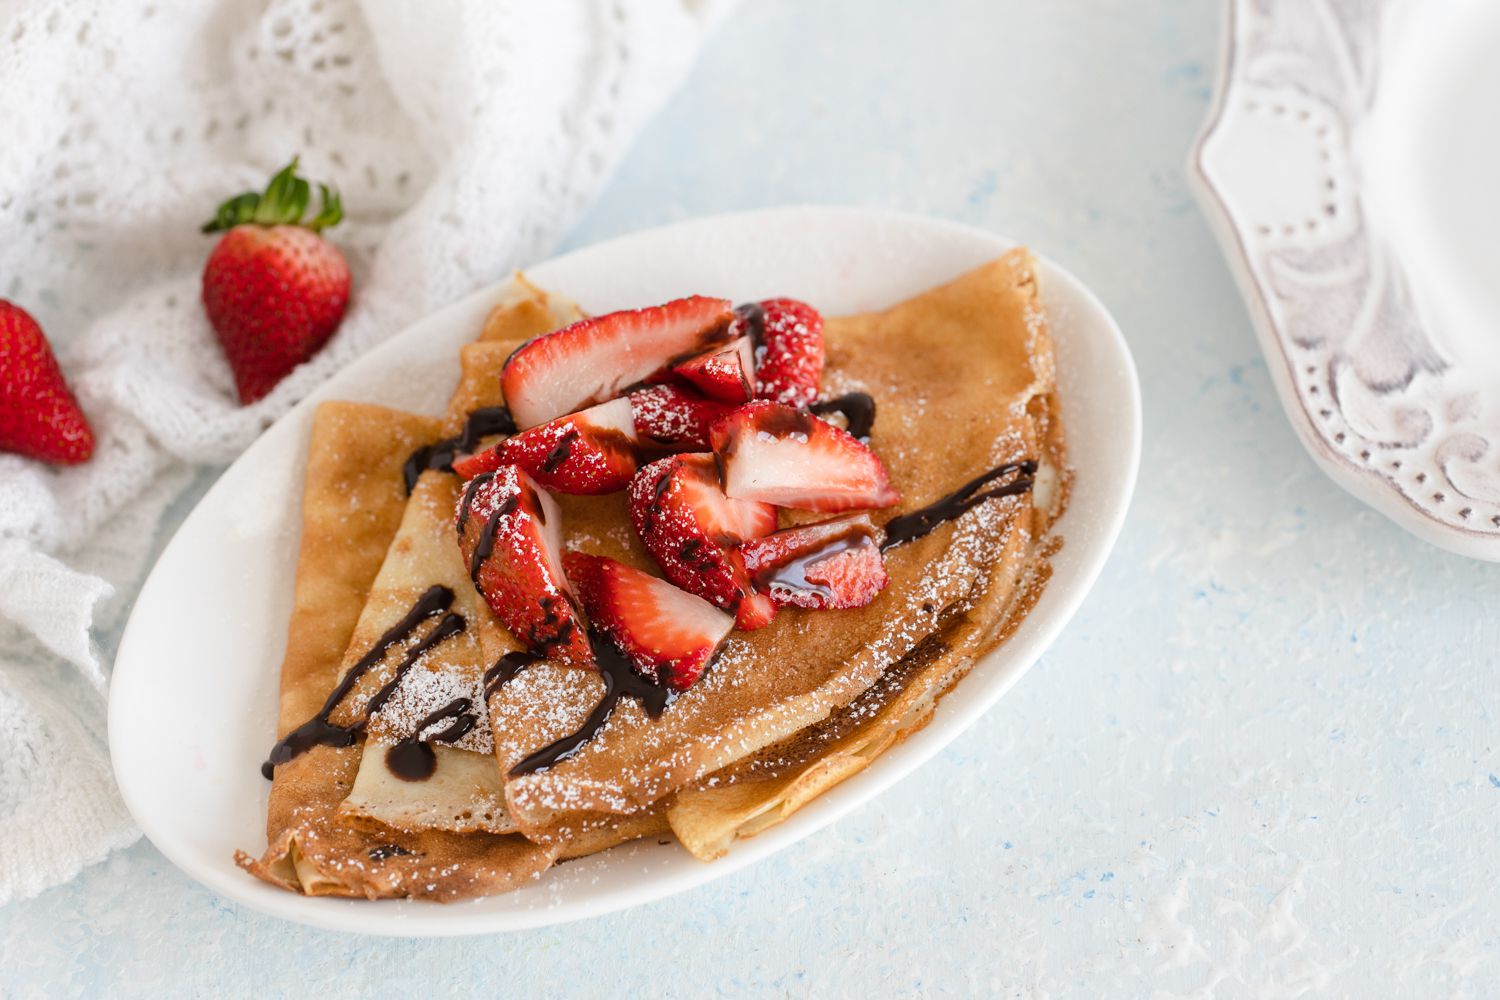 🍰 Only a Baked Good Connoisseur Will Have Eaten at Least 20/39 of These Foods Crêpe